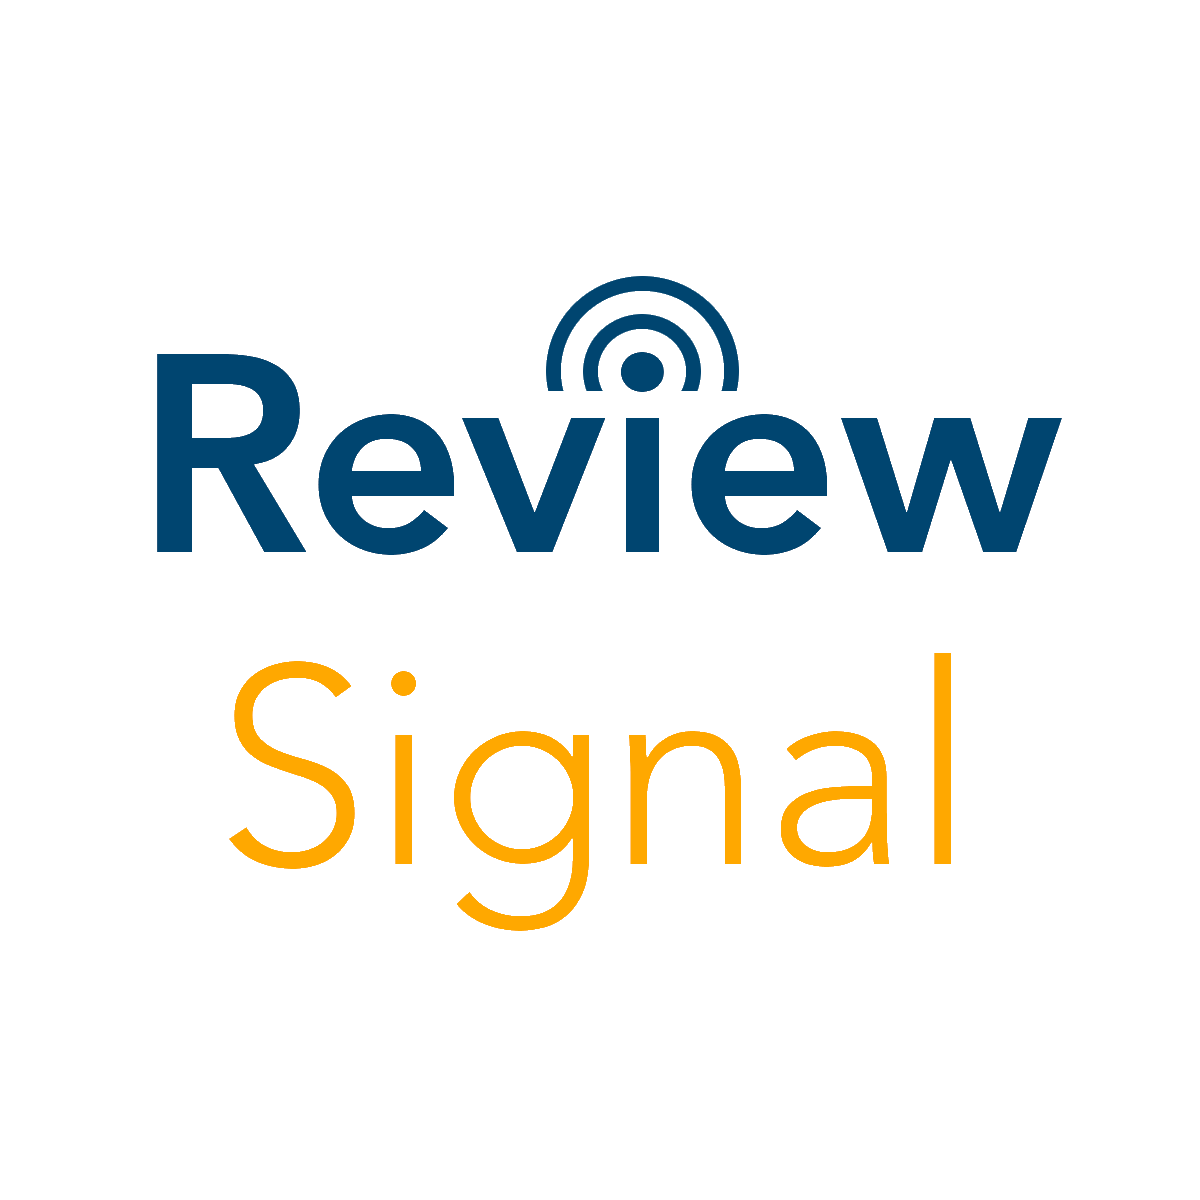 An interview with Review Signal founder Kevin Ohashi